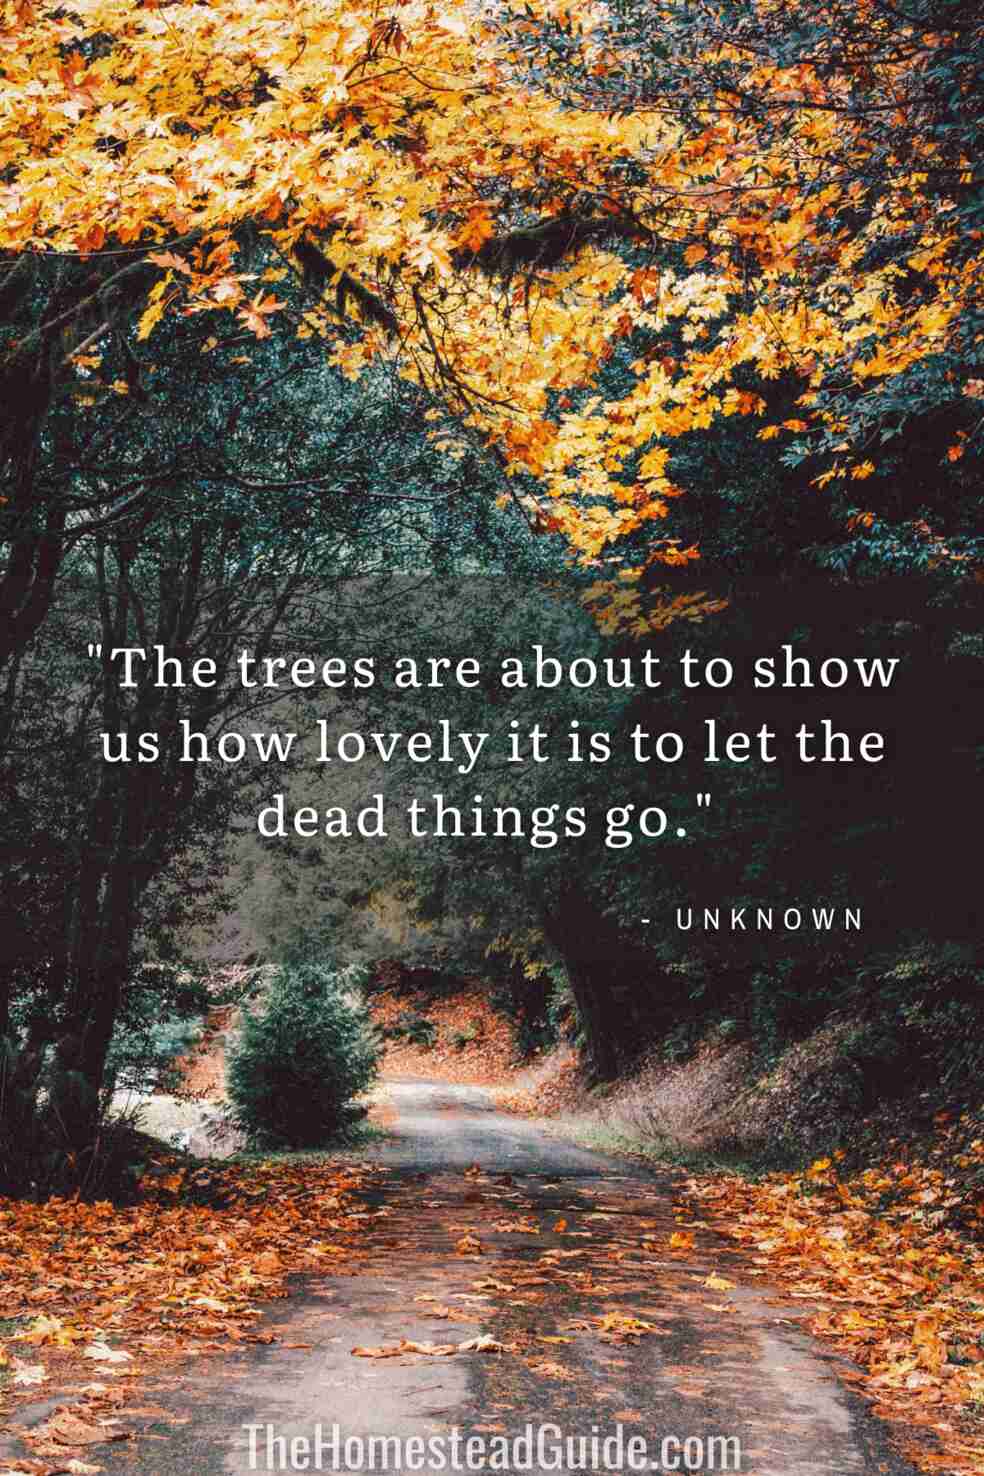 The trees are about to show us how lovely it is to let the dead things go.